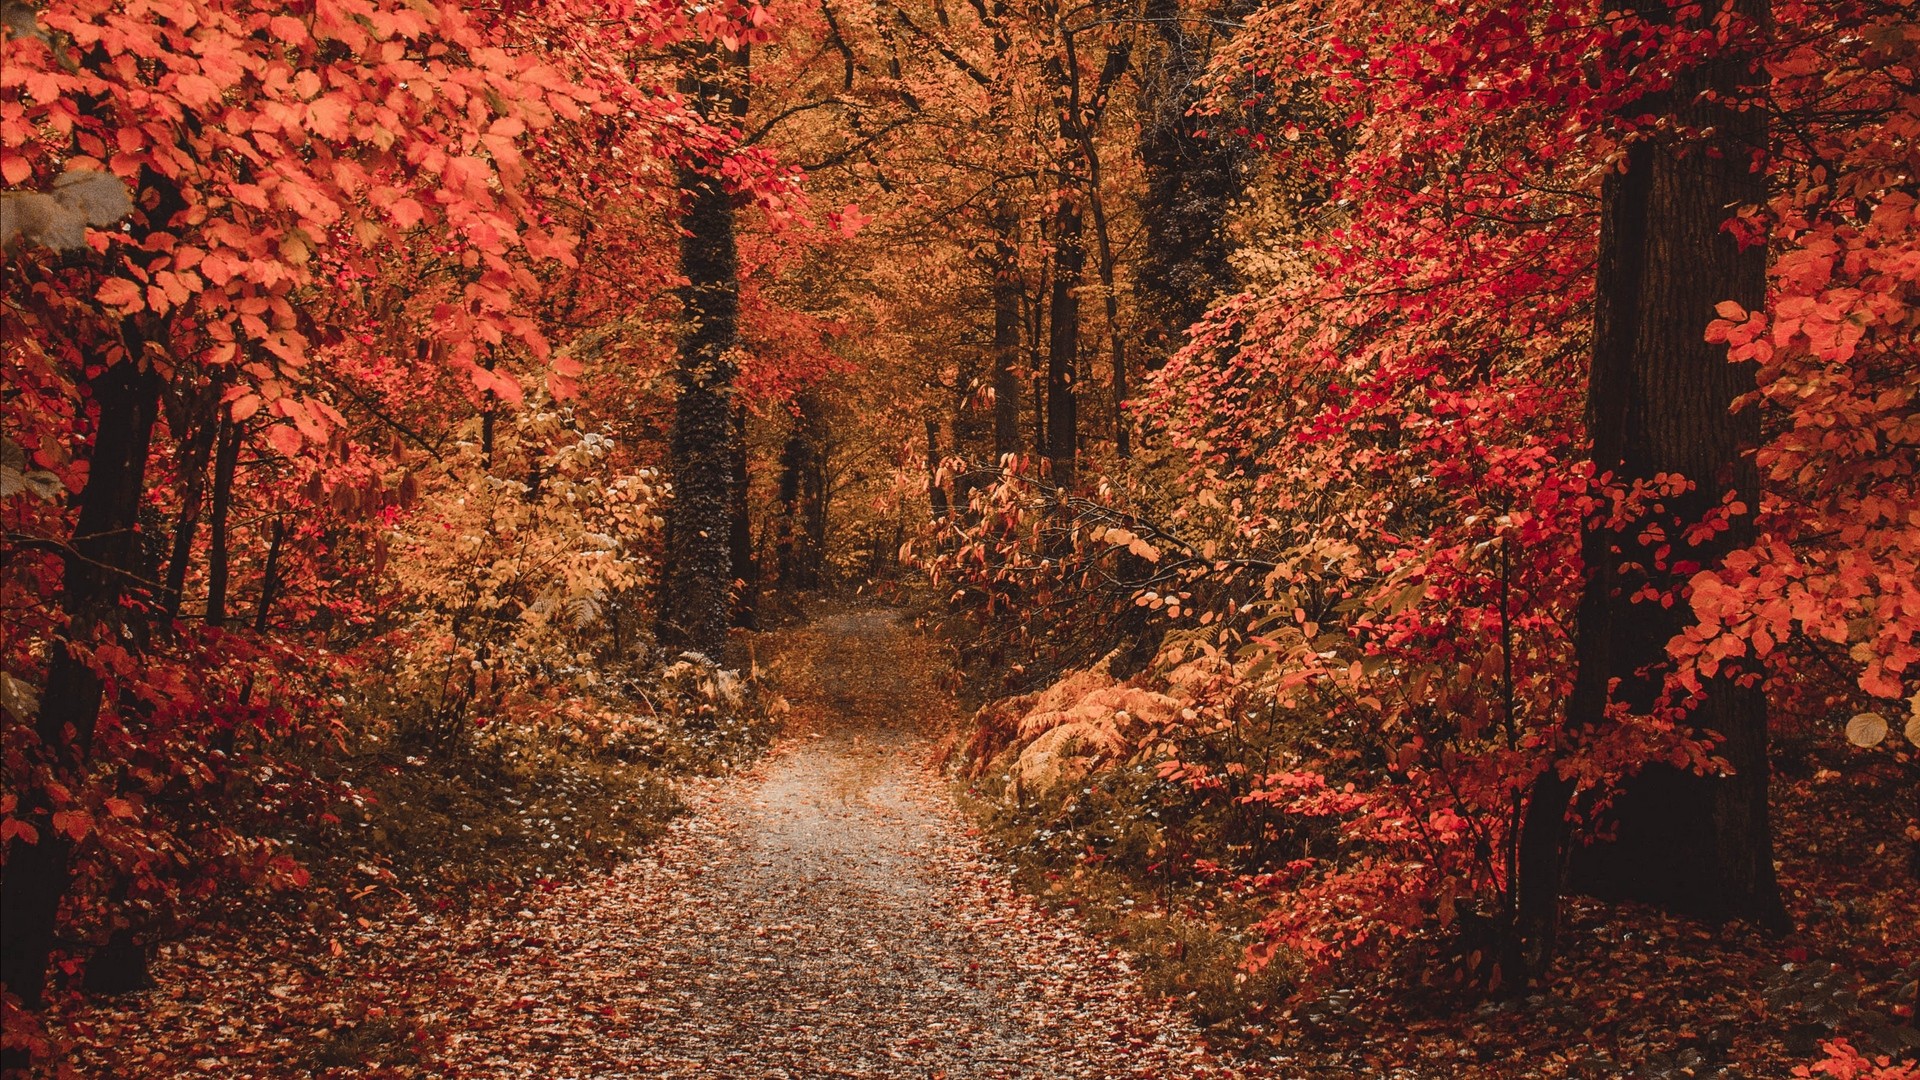 1920x1080 wallpapers: autumn, forest, path, foliage, autumn colors (image)